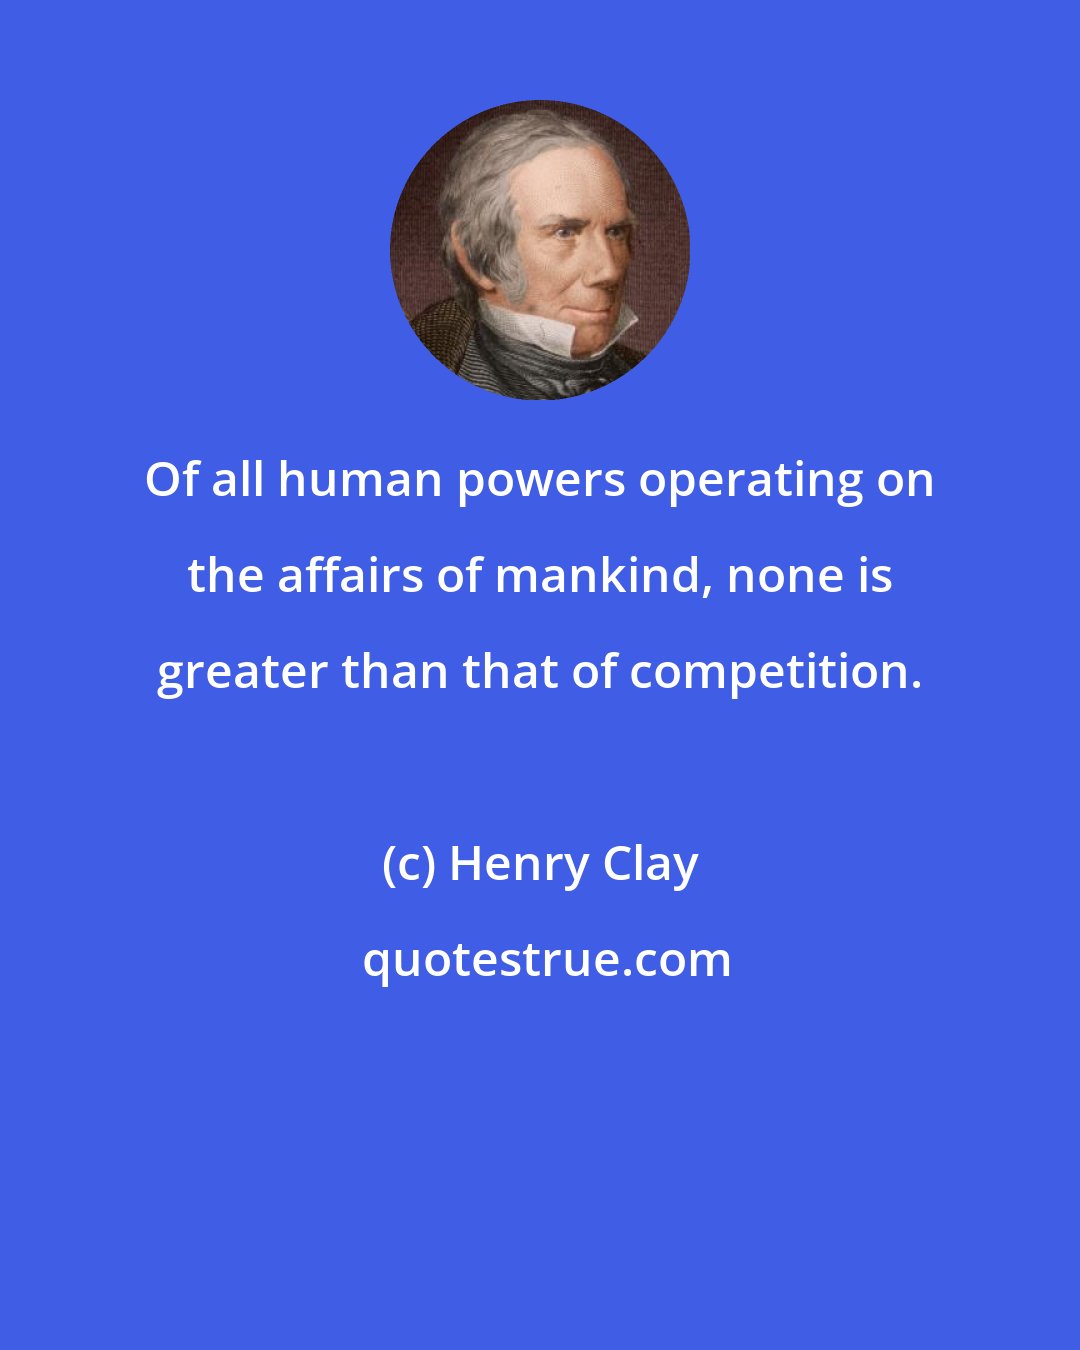 Henry Clay: Of all human powers operating on the affairs of mankind, none is greater than that of competition.